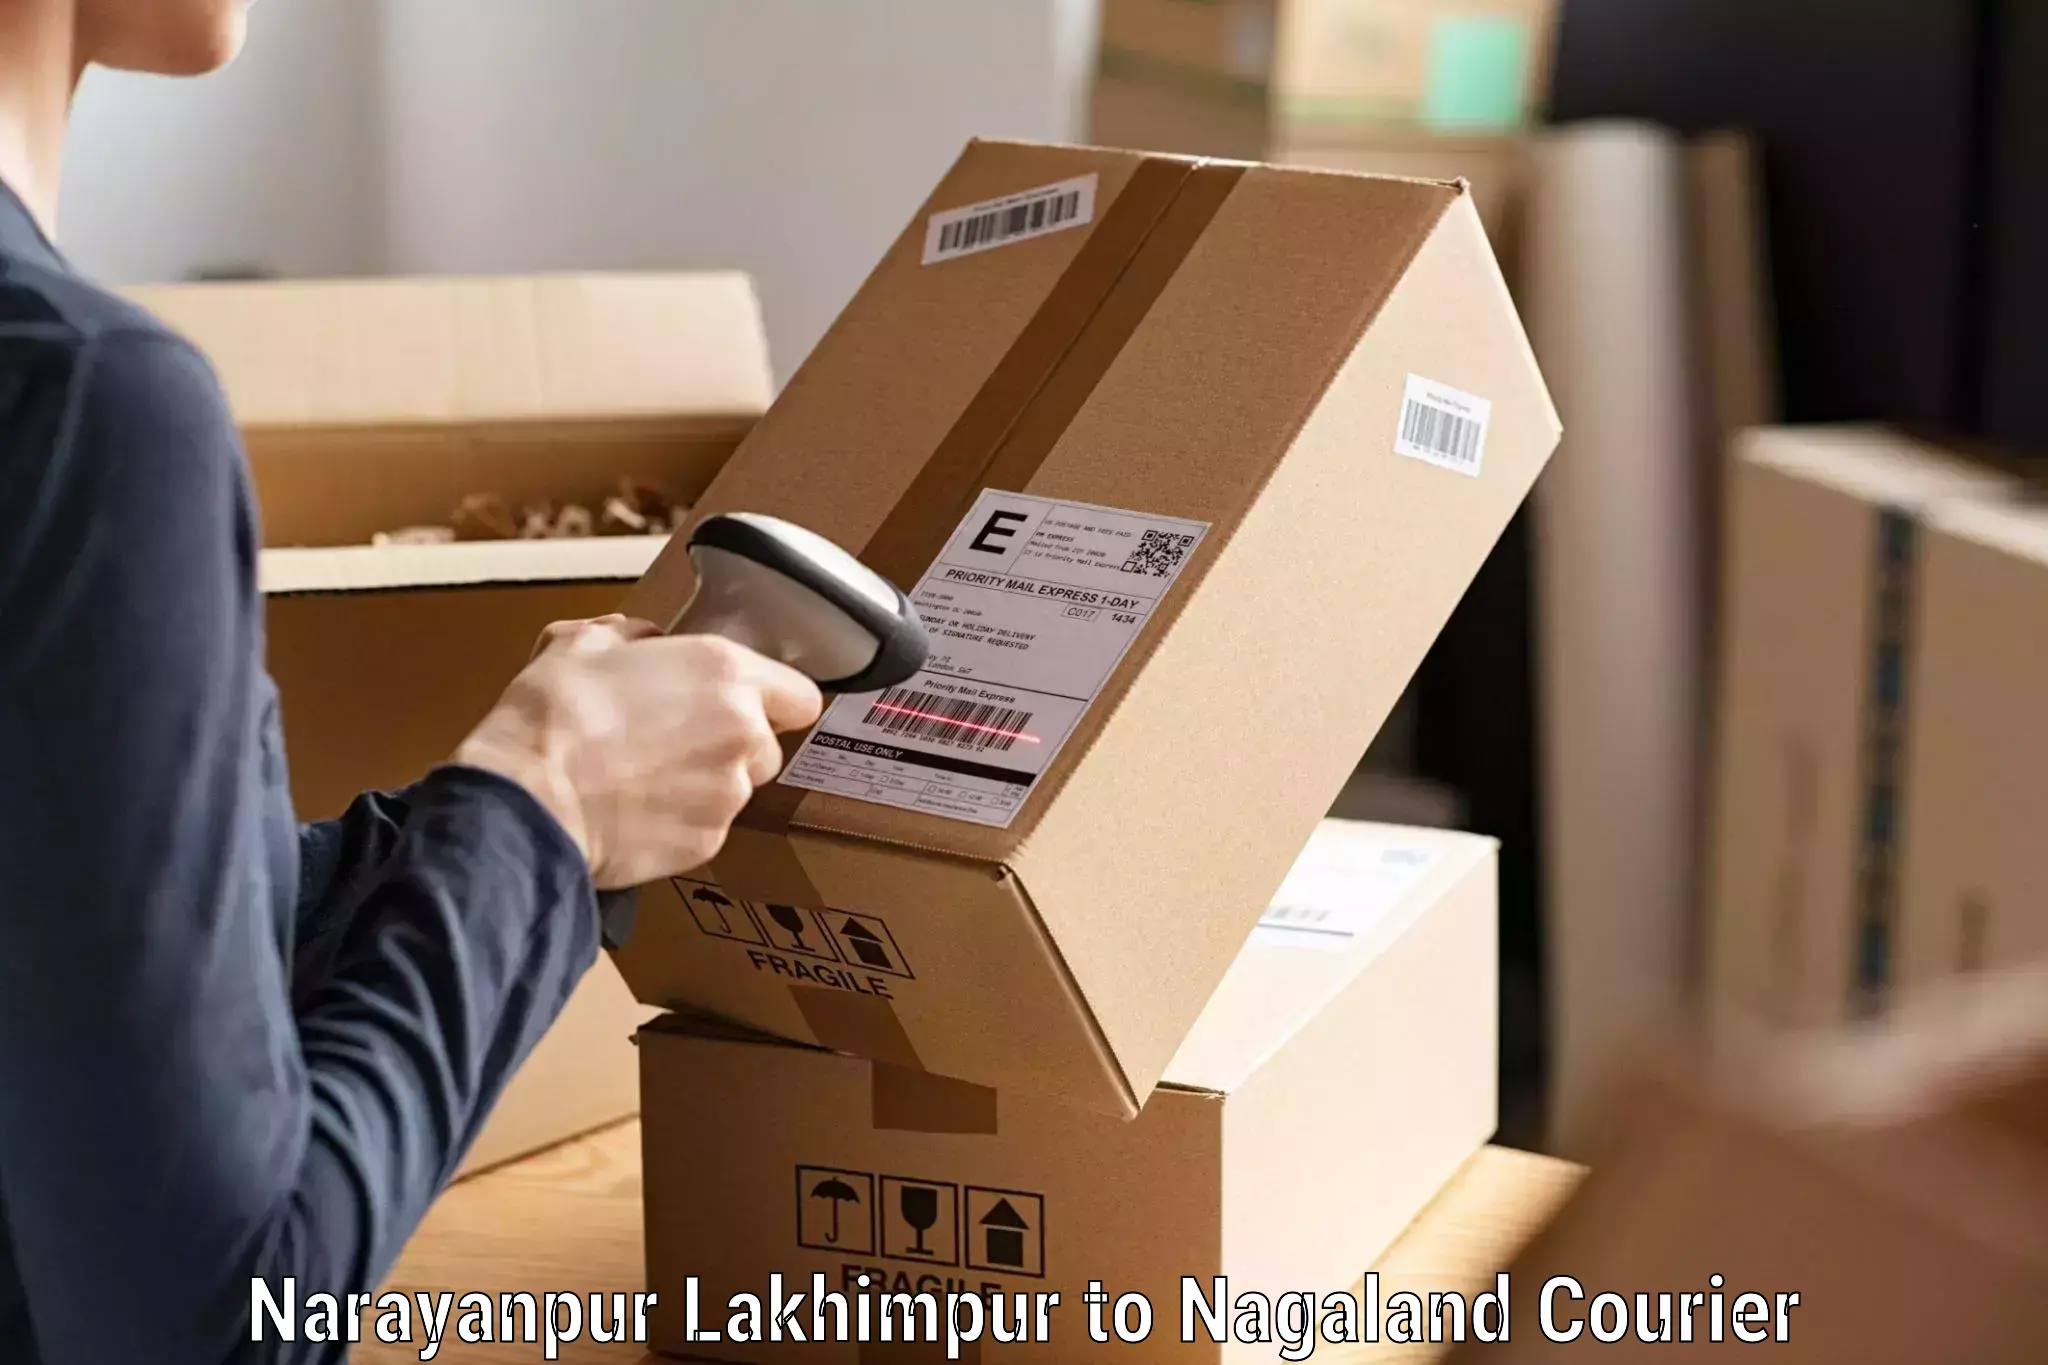 Cargo delivery service Narayanpur Lakhimpur to Peren